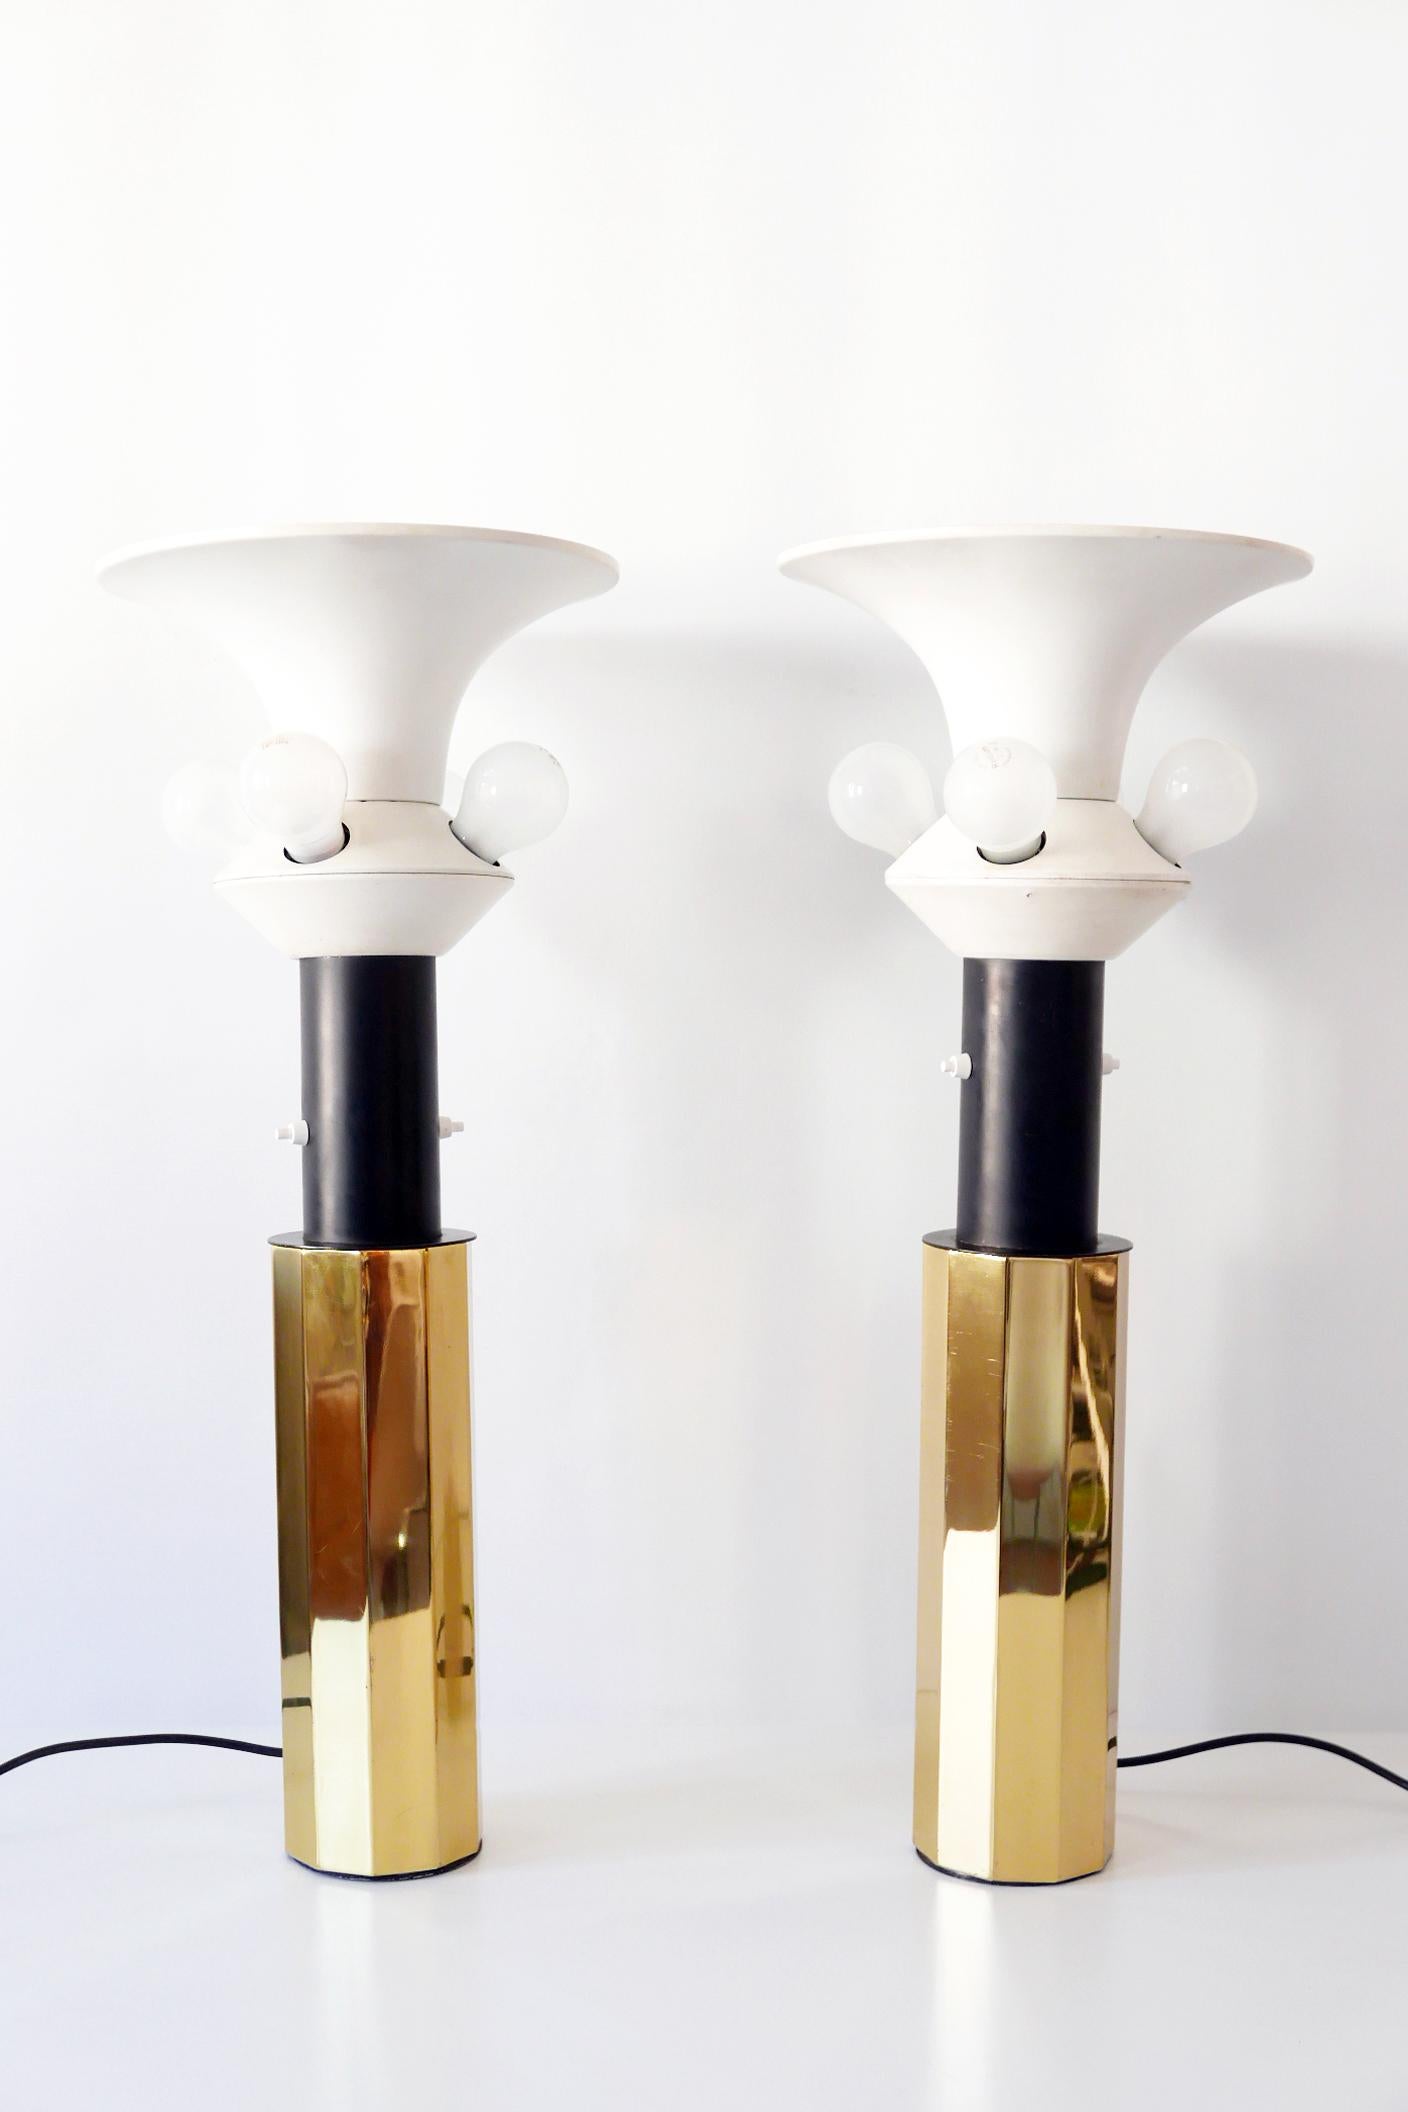 Set of Two Huge, 5-Flamed Midcentury Decagonal Brass Table Lamps, 1960s, Germany For Sale 5